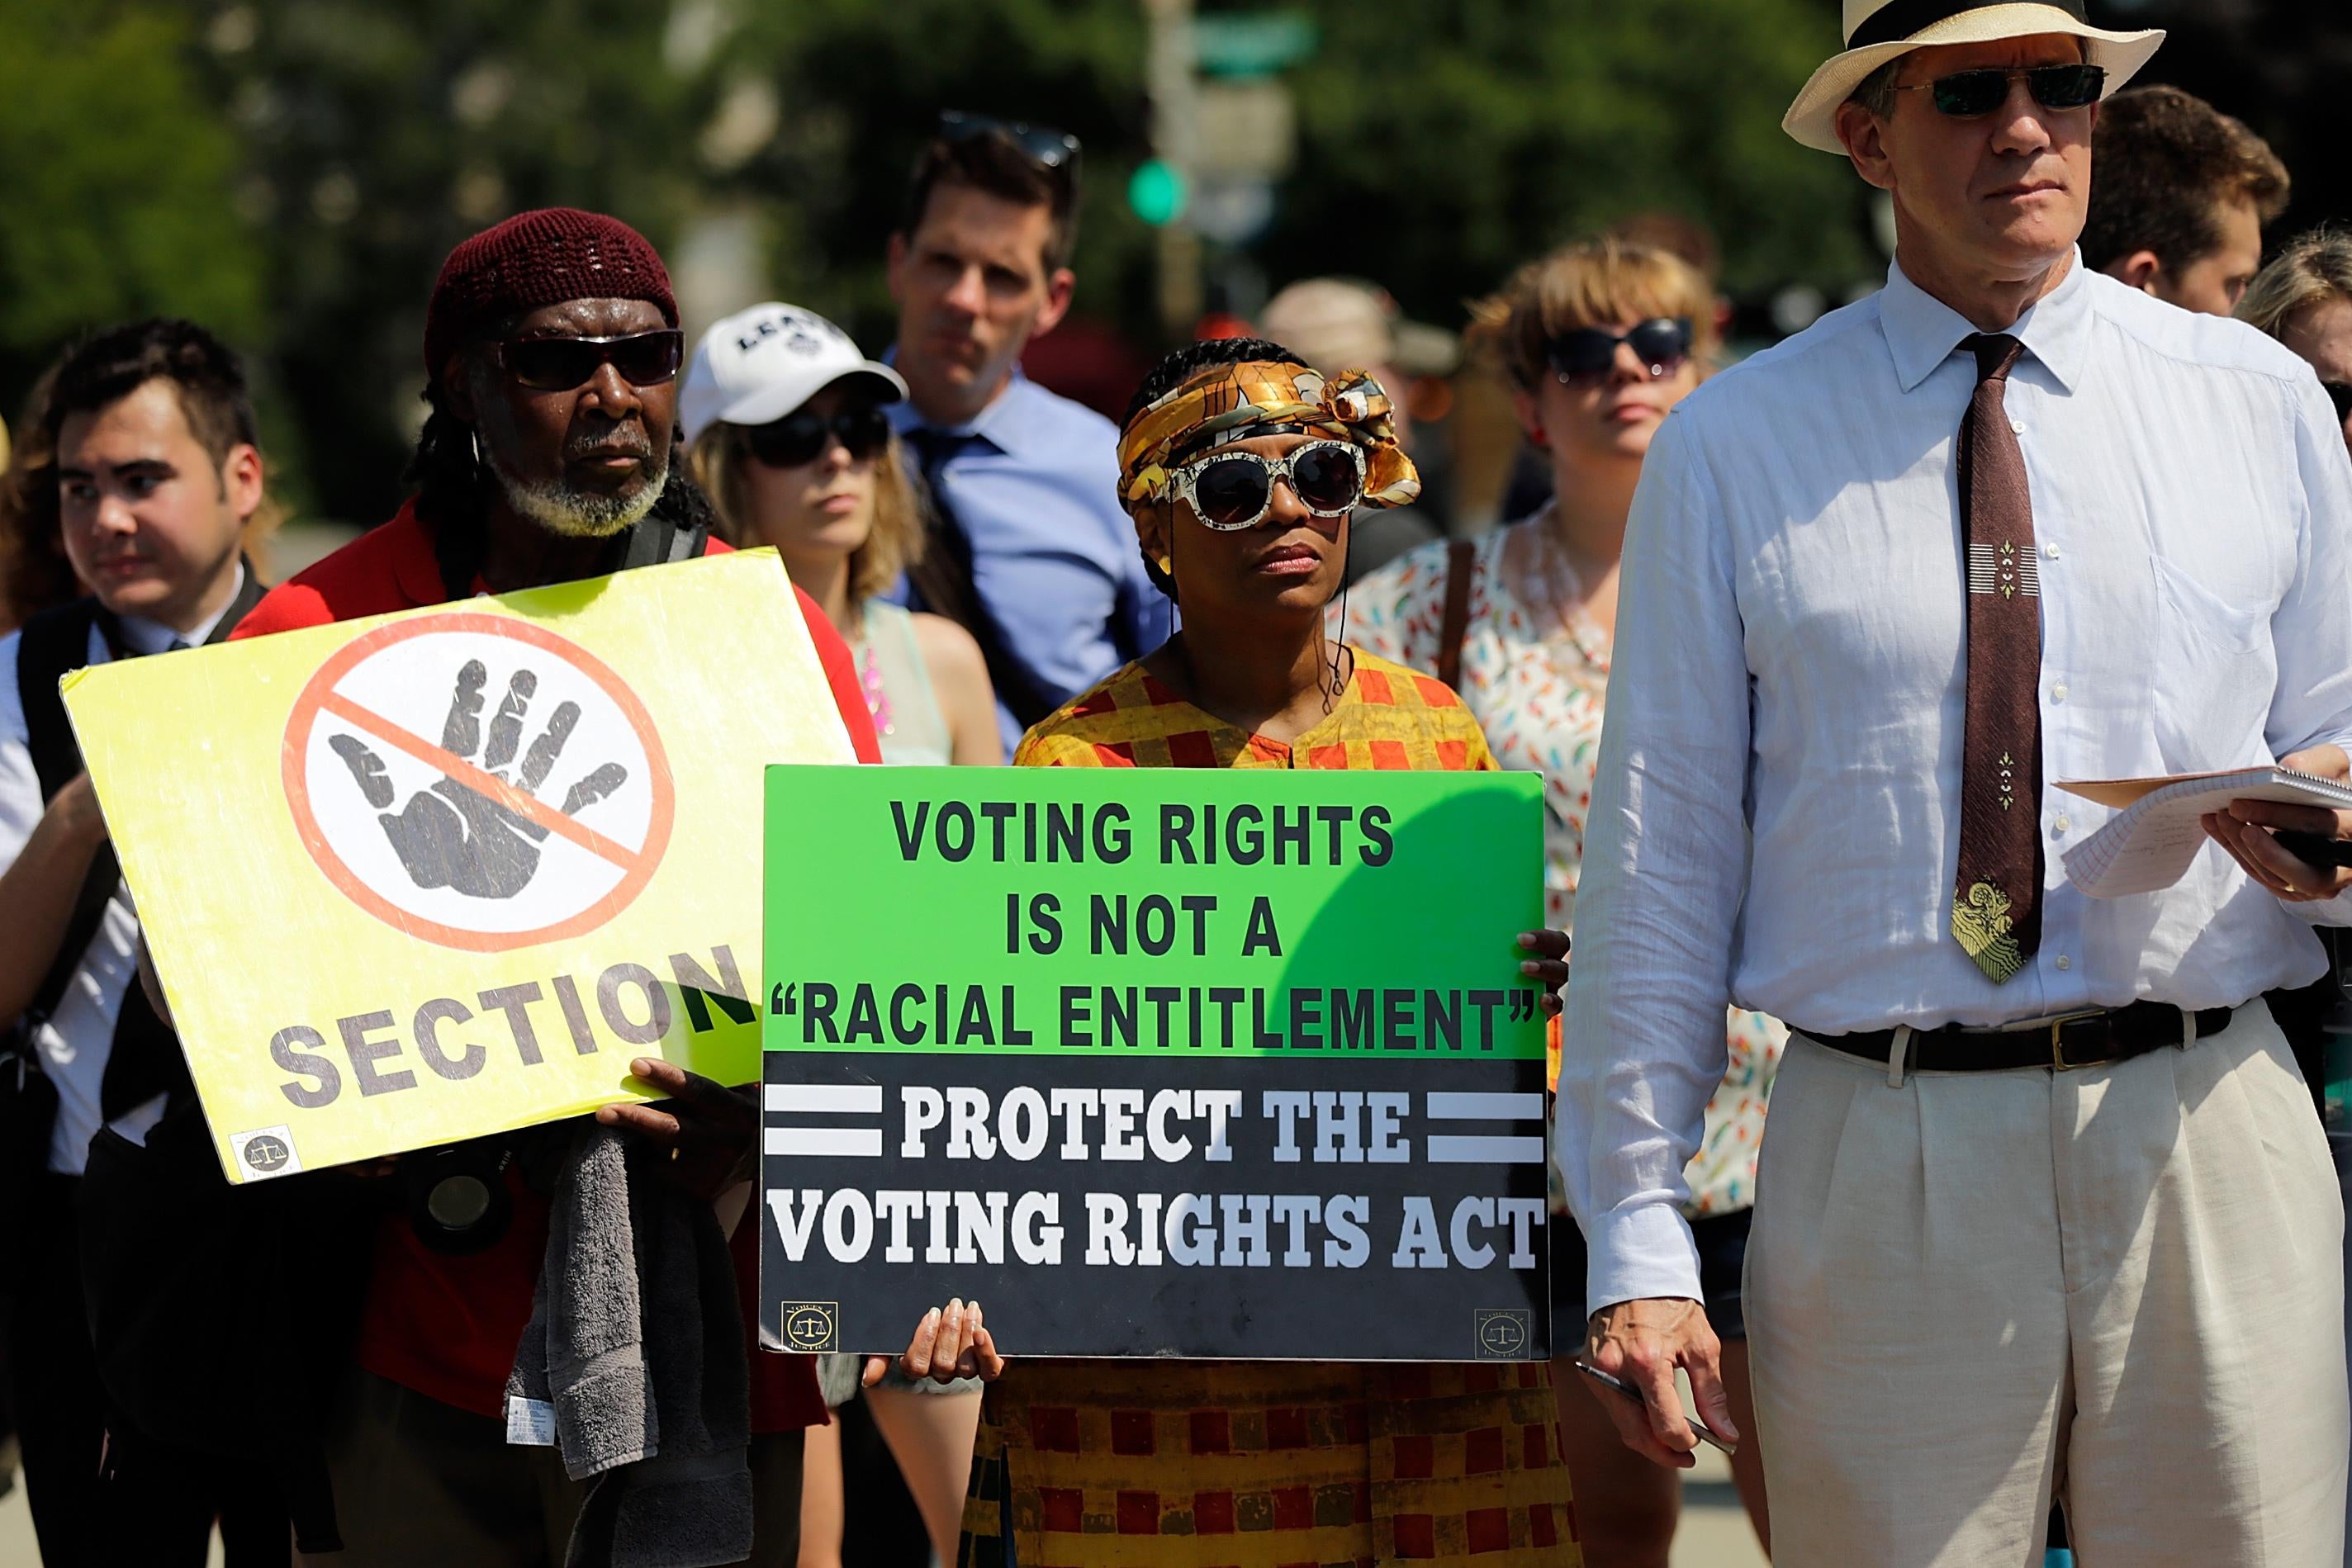 A crowd of protesters gathers with signs in support of the Voting Rights Act